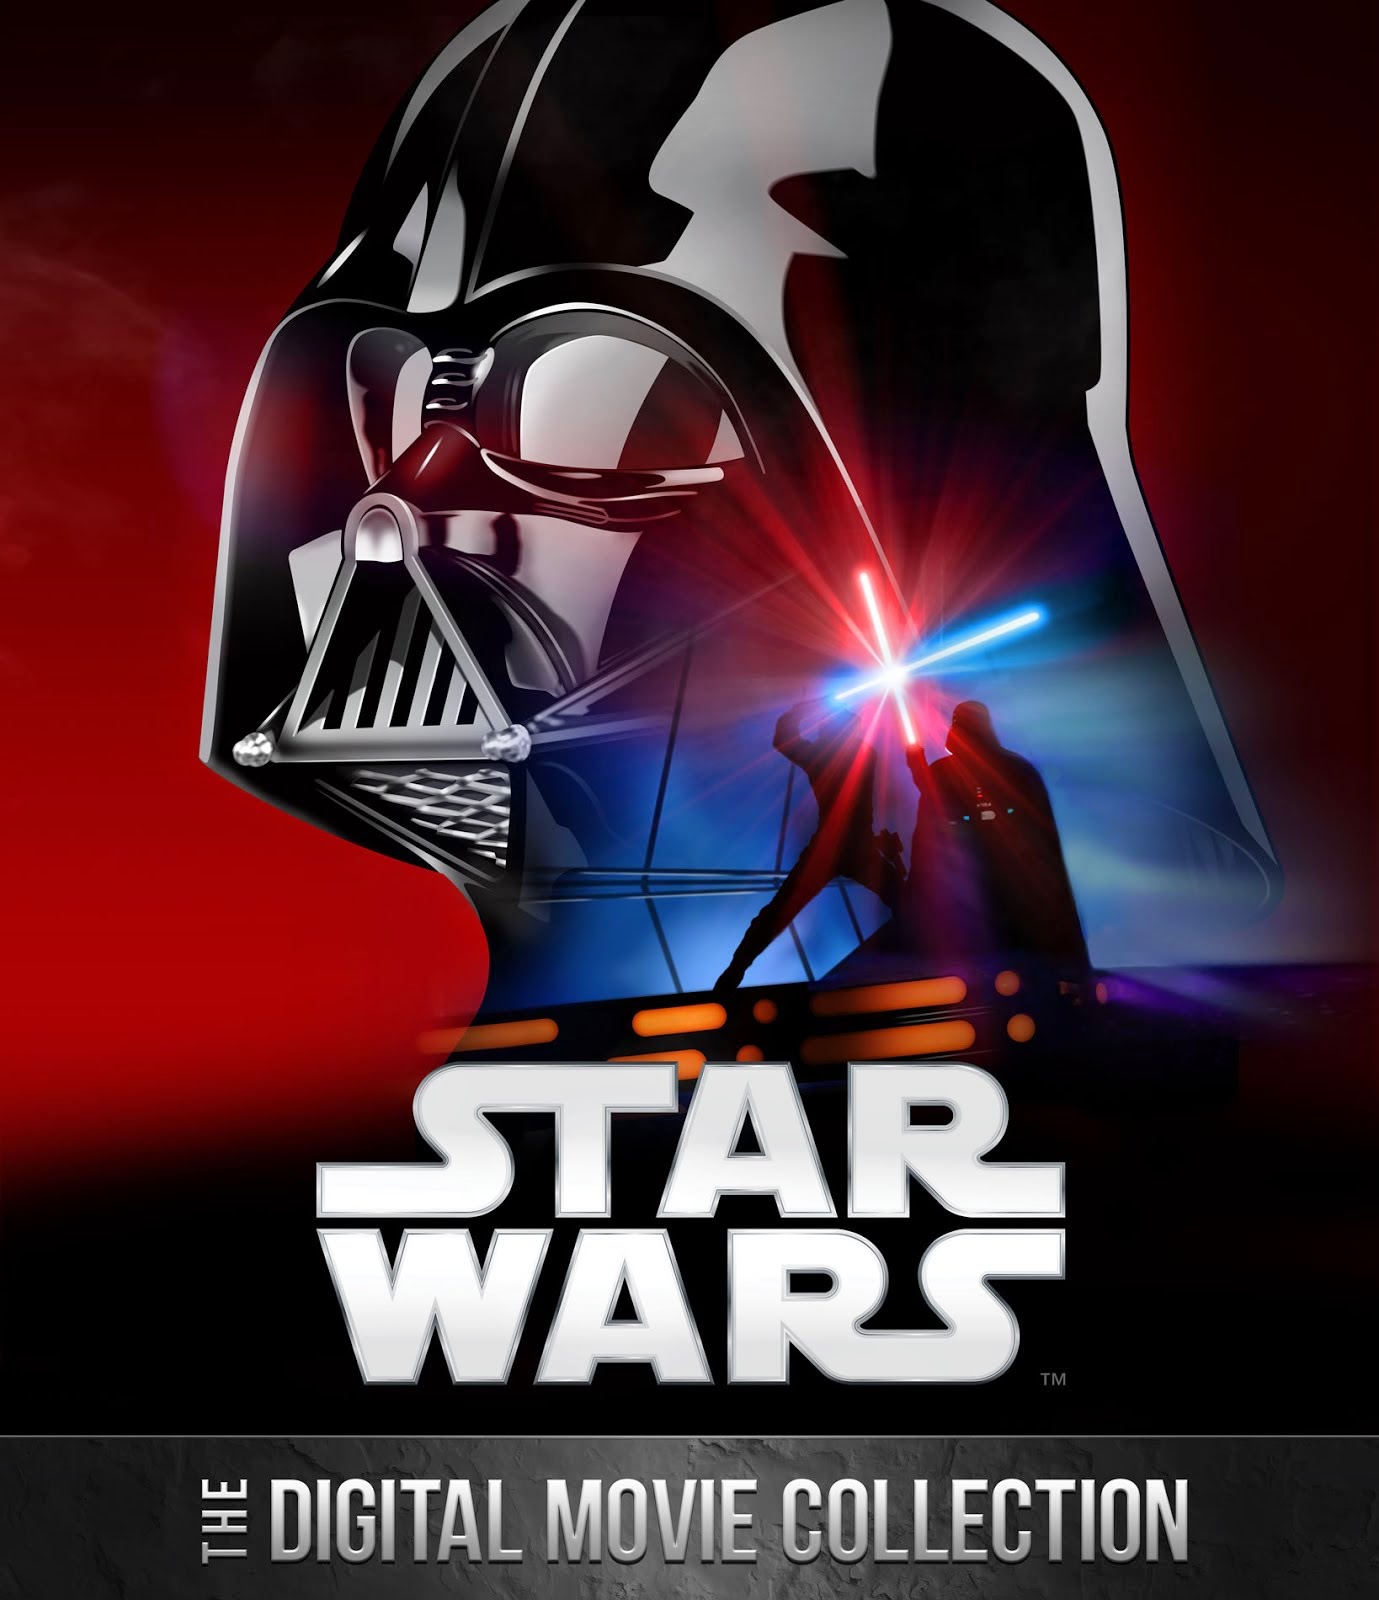 STAR WARS: THE DIGITAL MOVIE COLLECTION